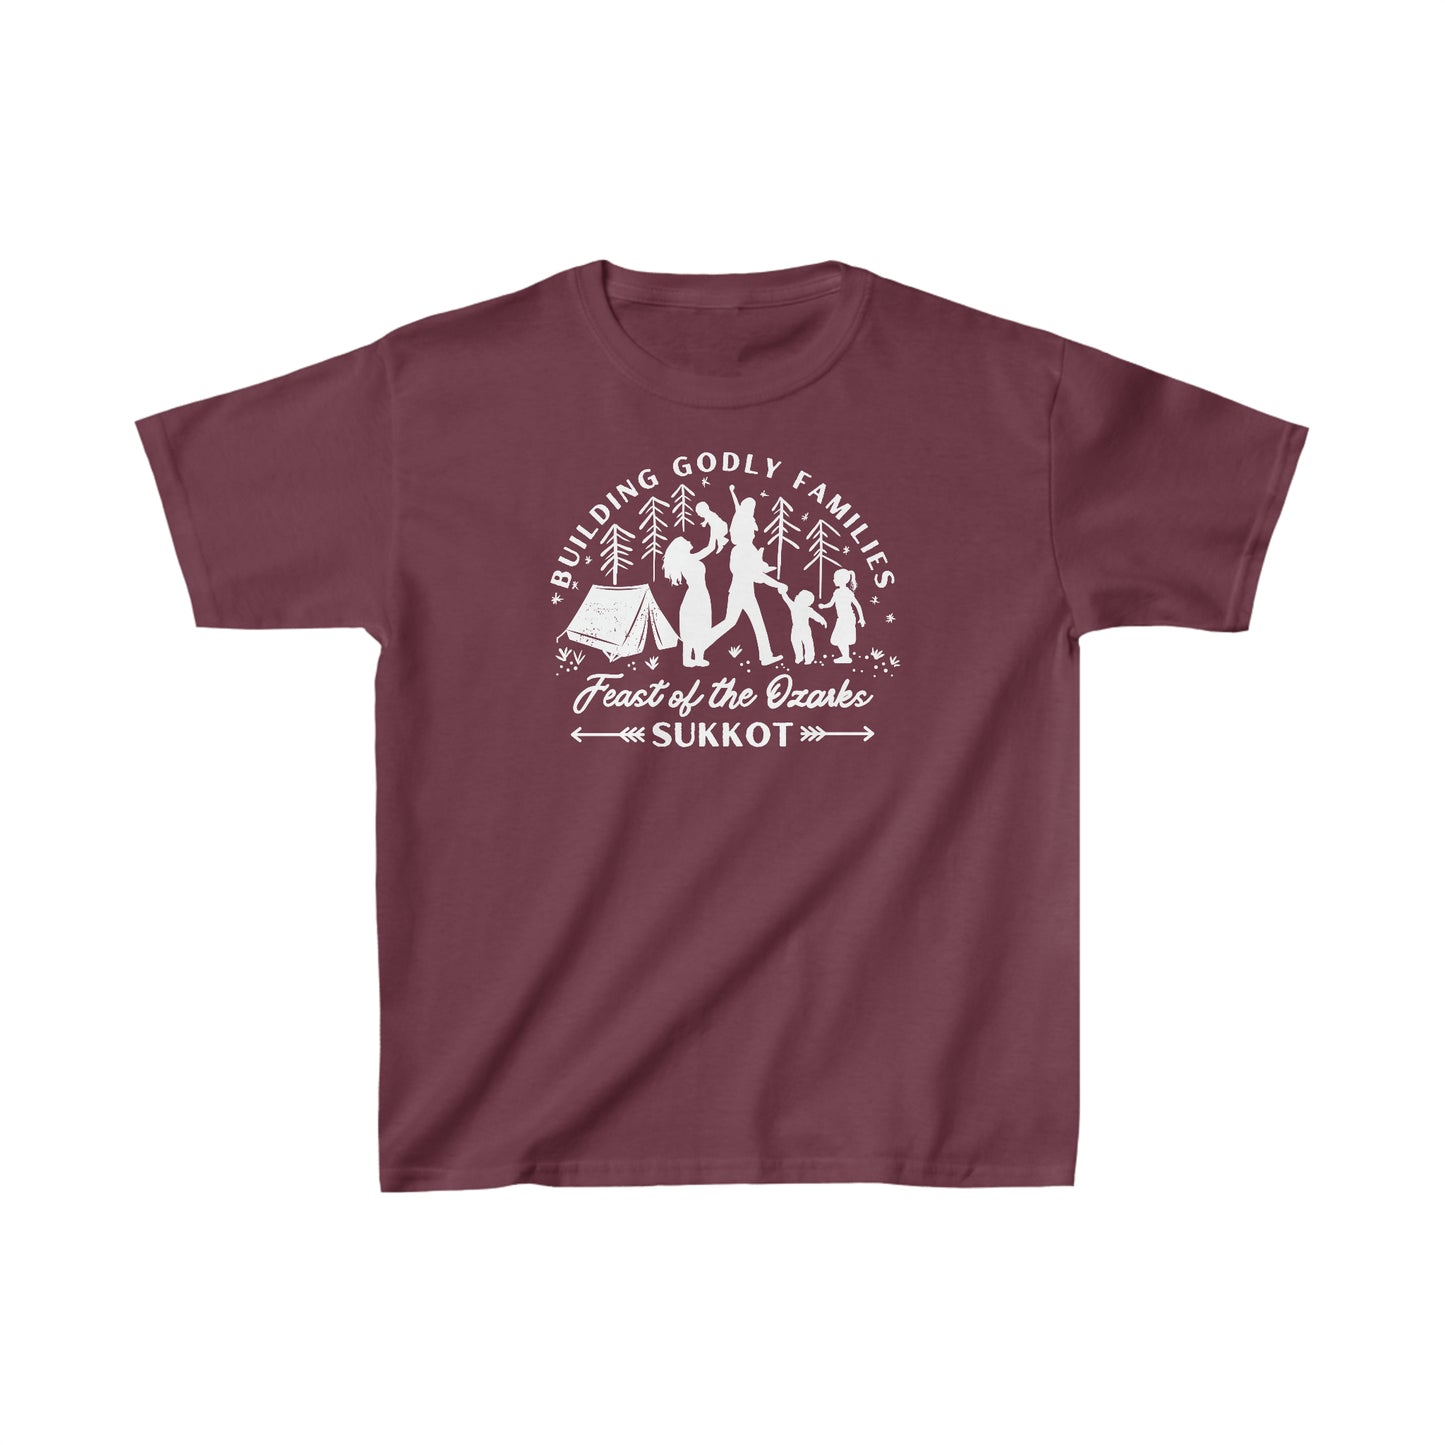 Children's Feast of the Ozarks Sukkot Tee With NO YEAR